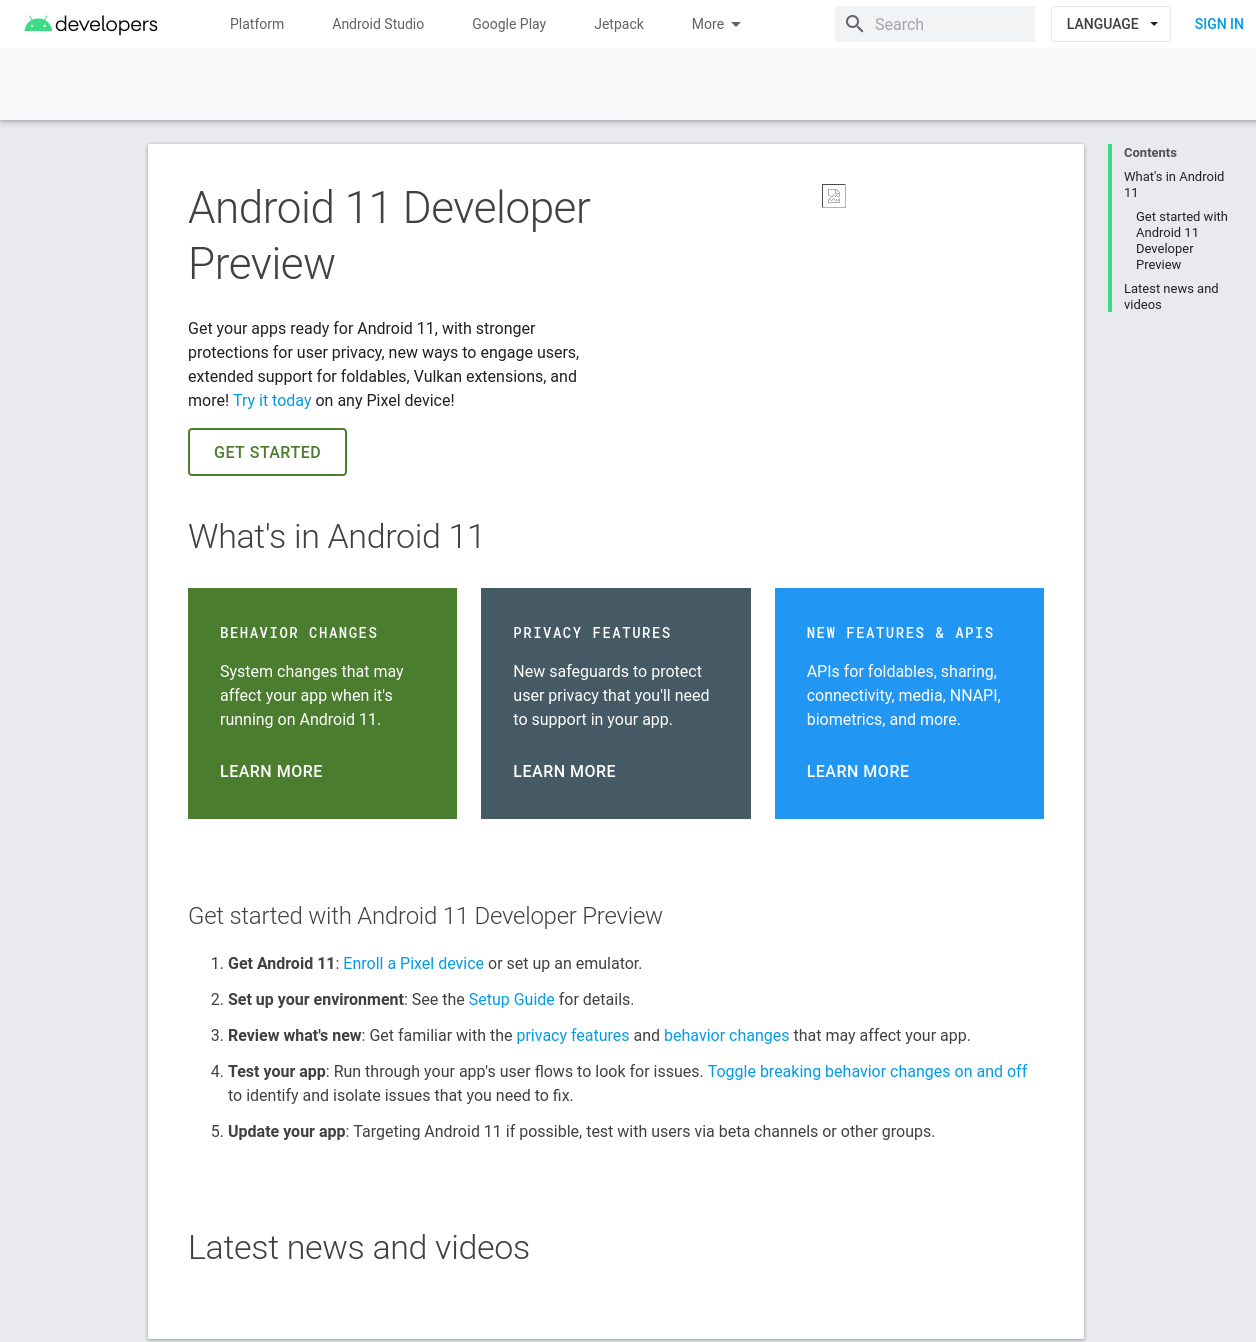 Android 11 Developer Preview page